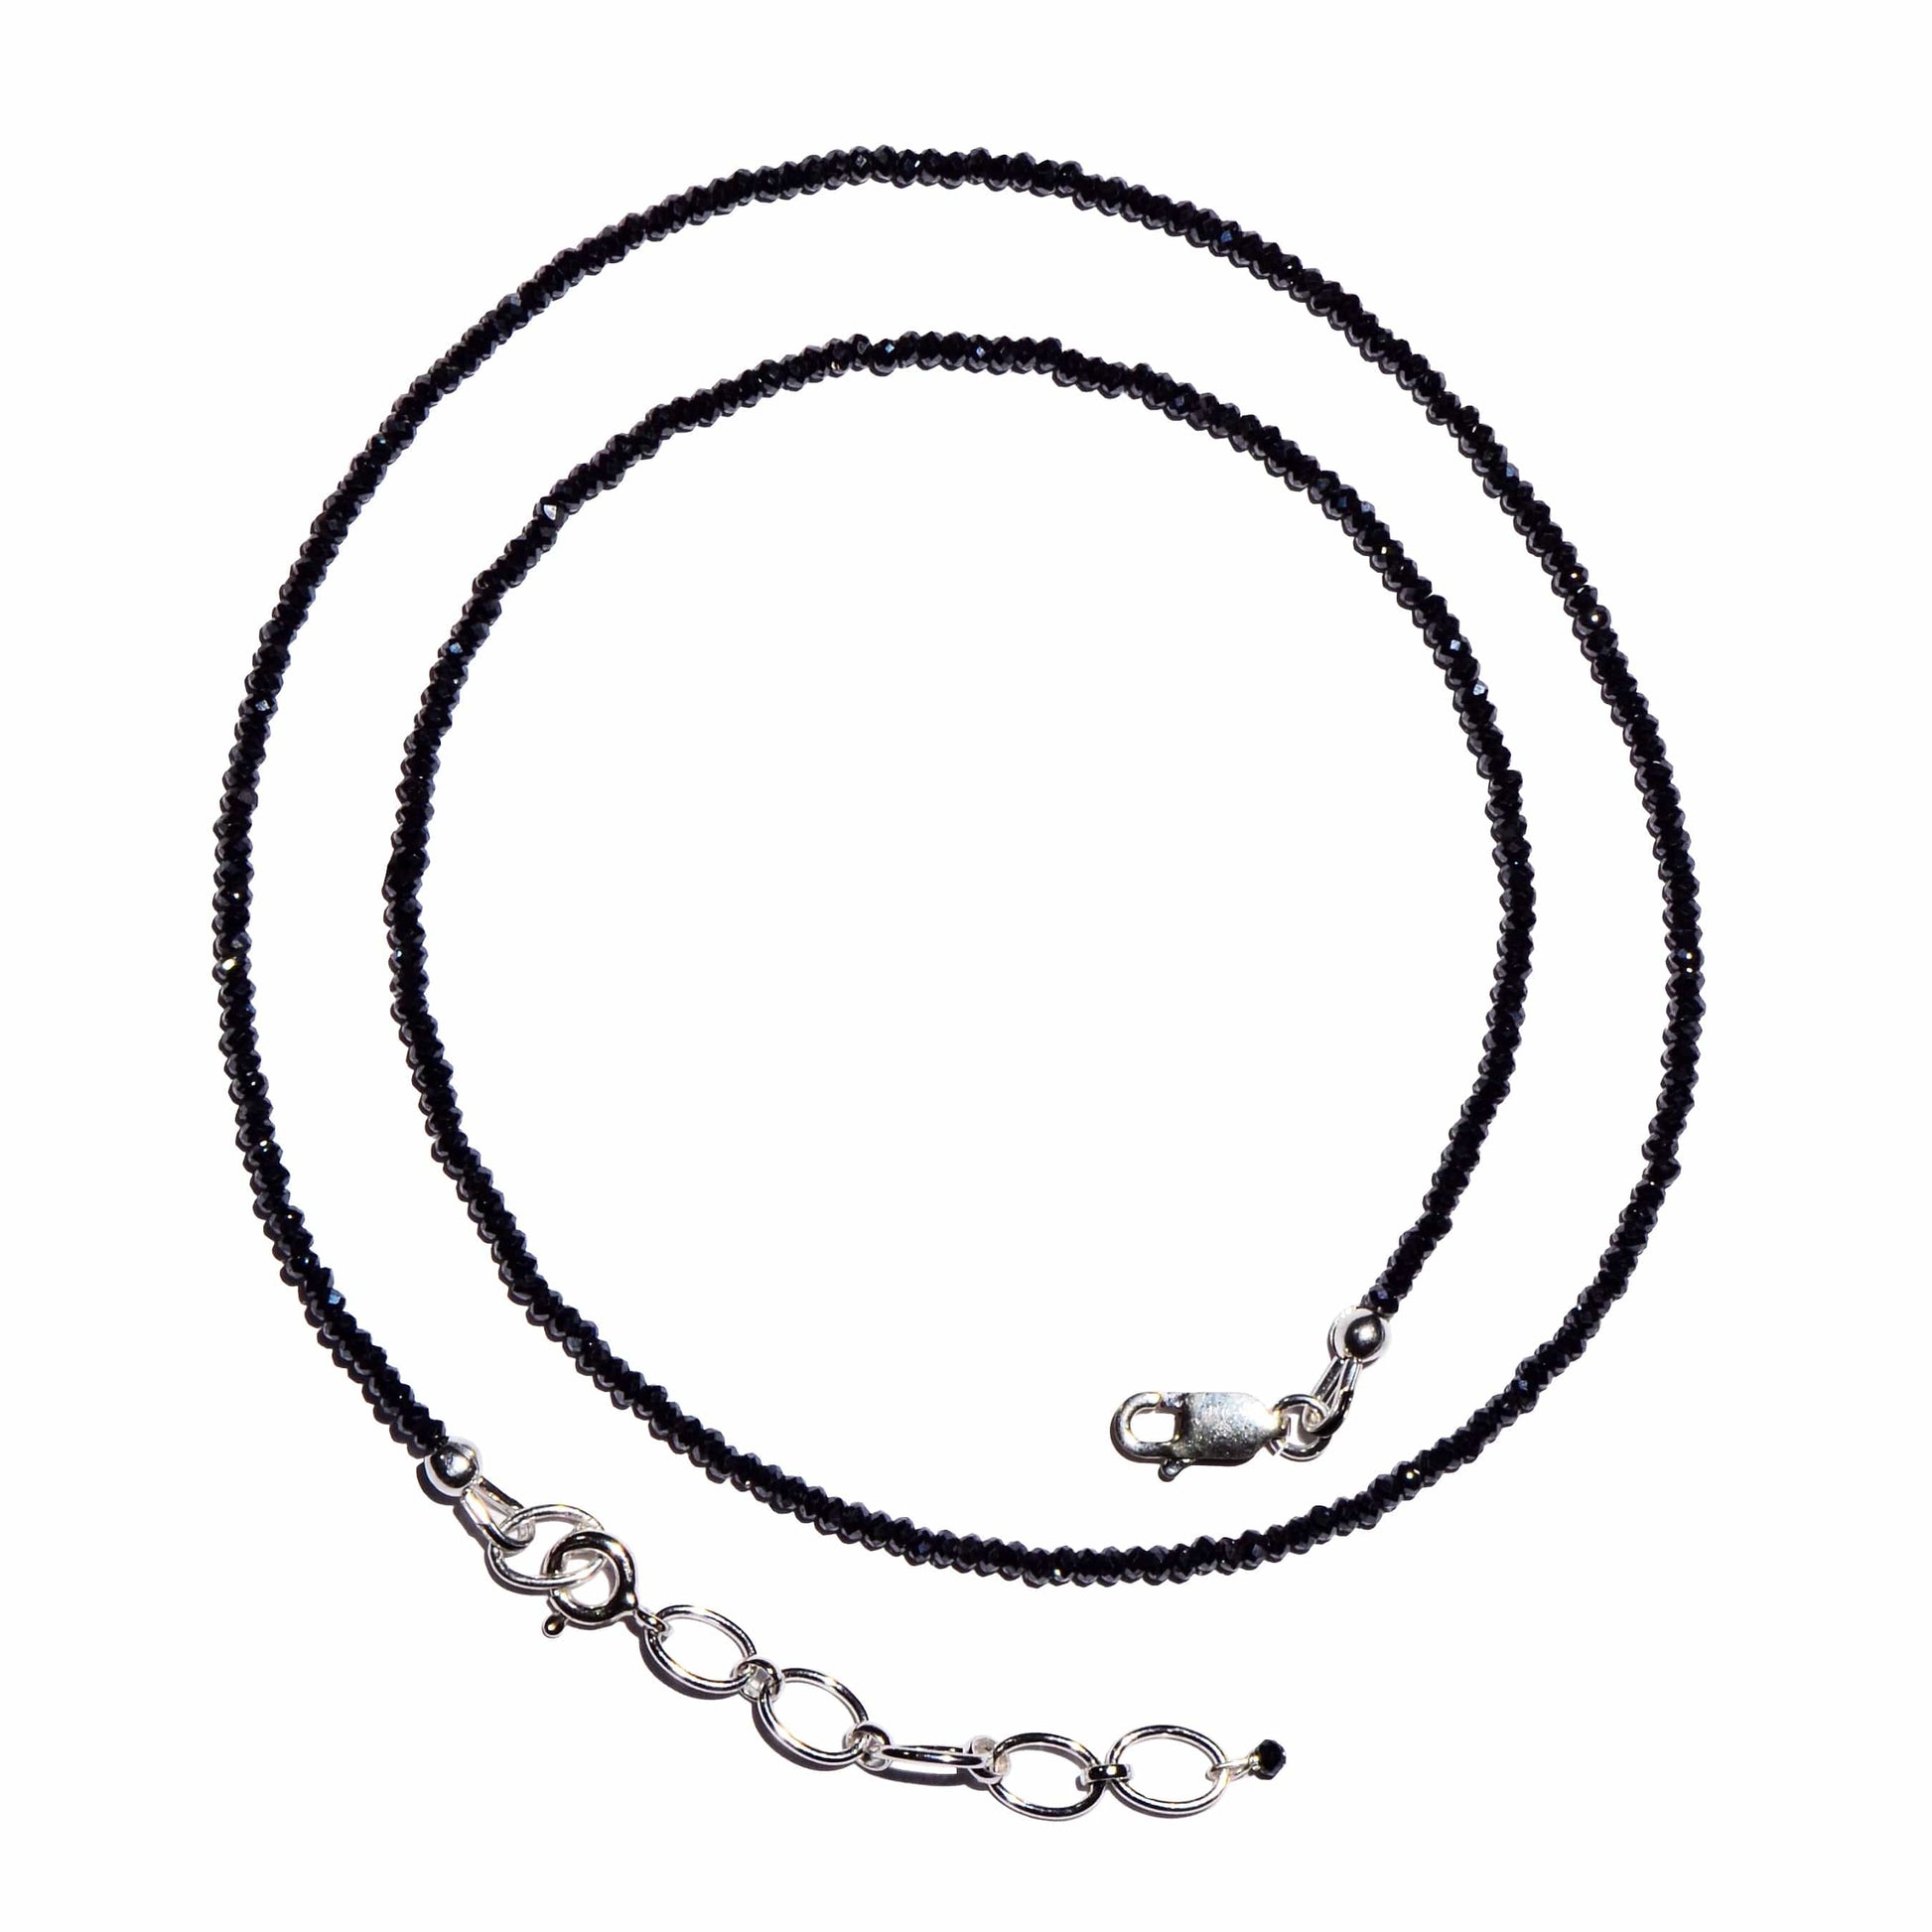 Buy Hematite Faceted Microbead Necklace 2mm for the stone of grounding.